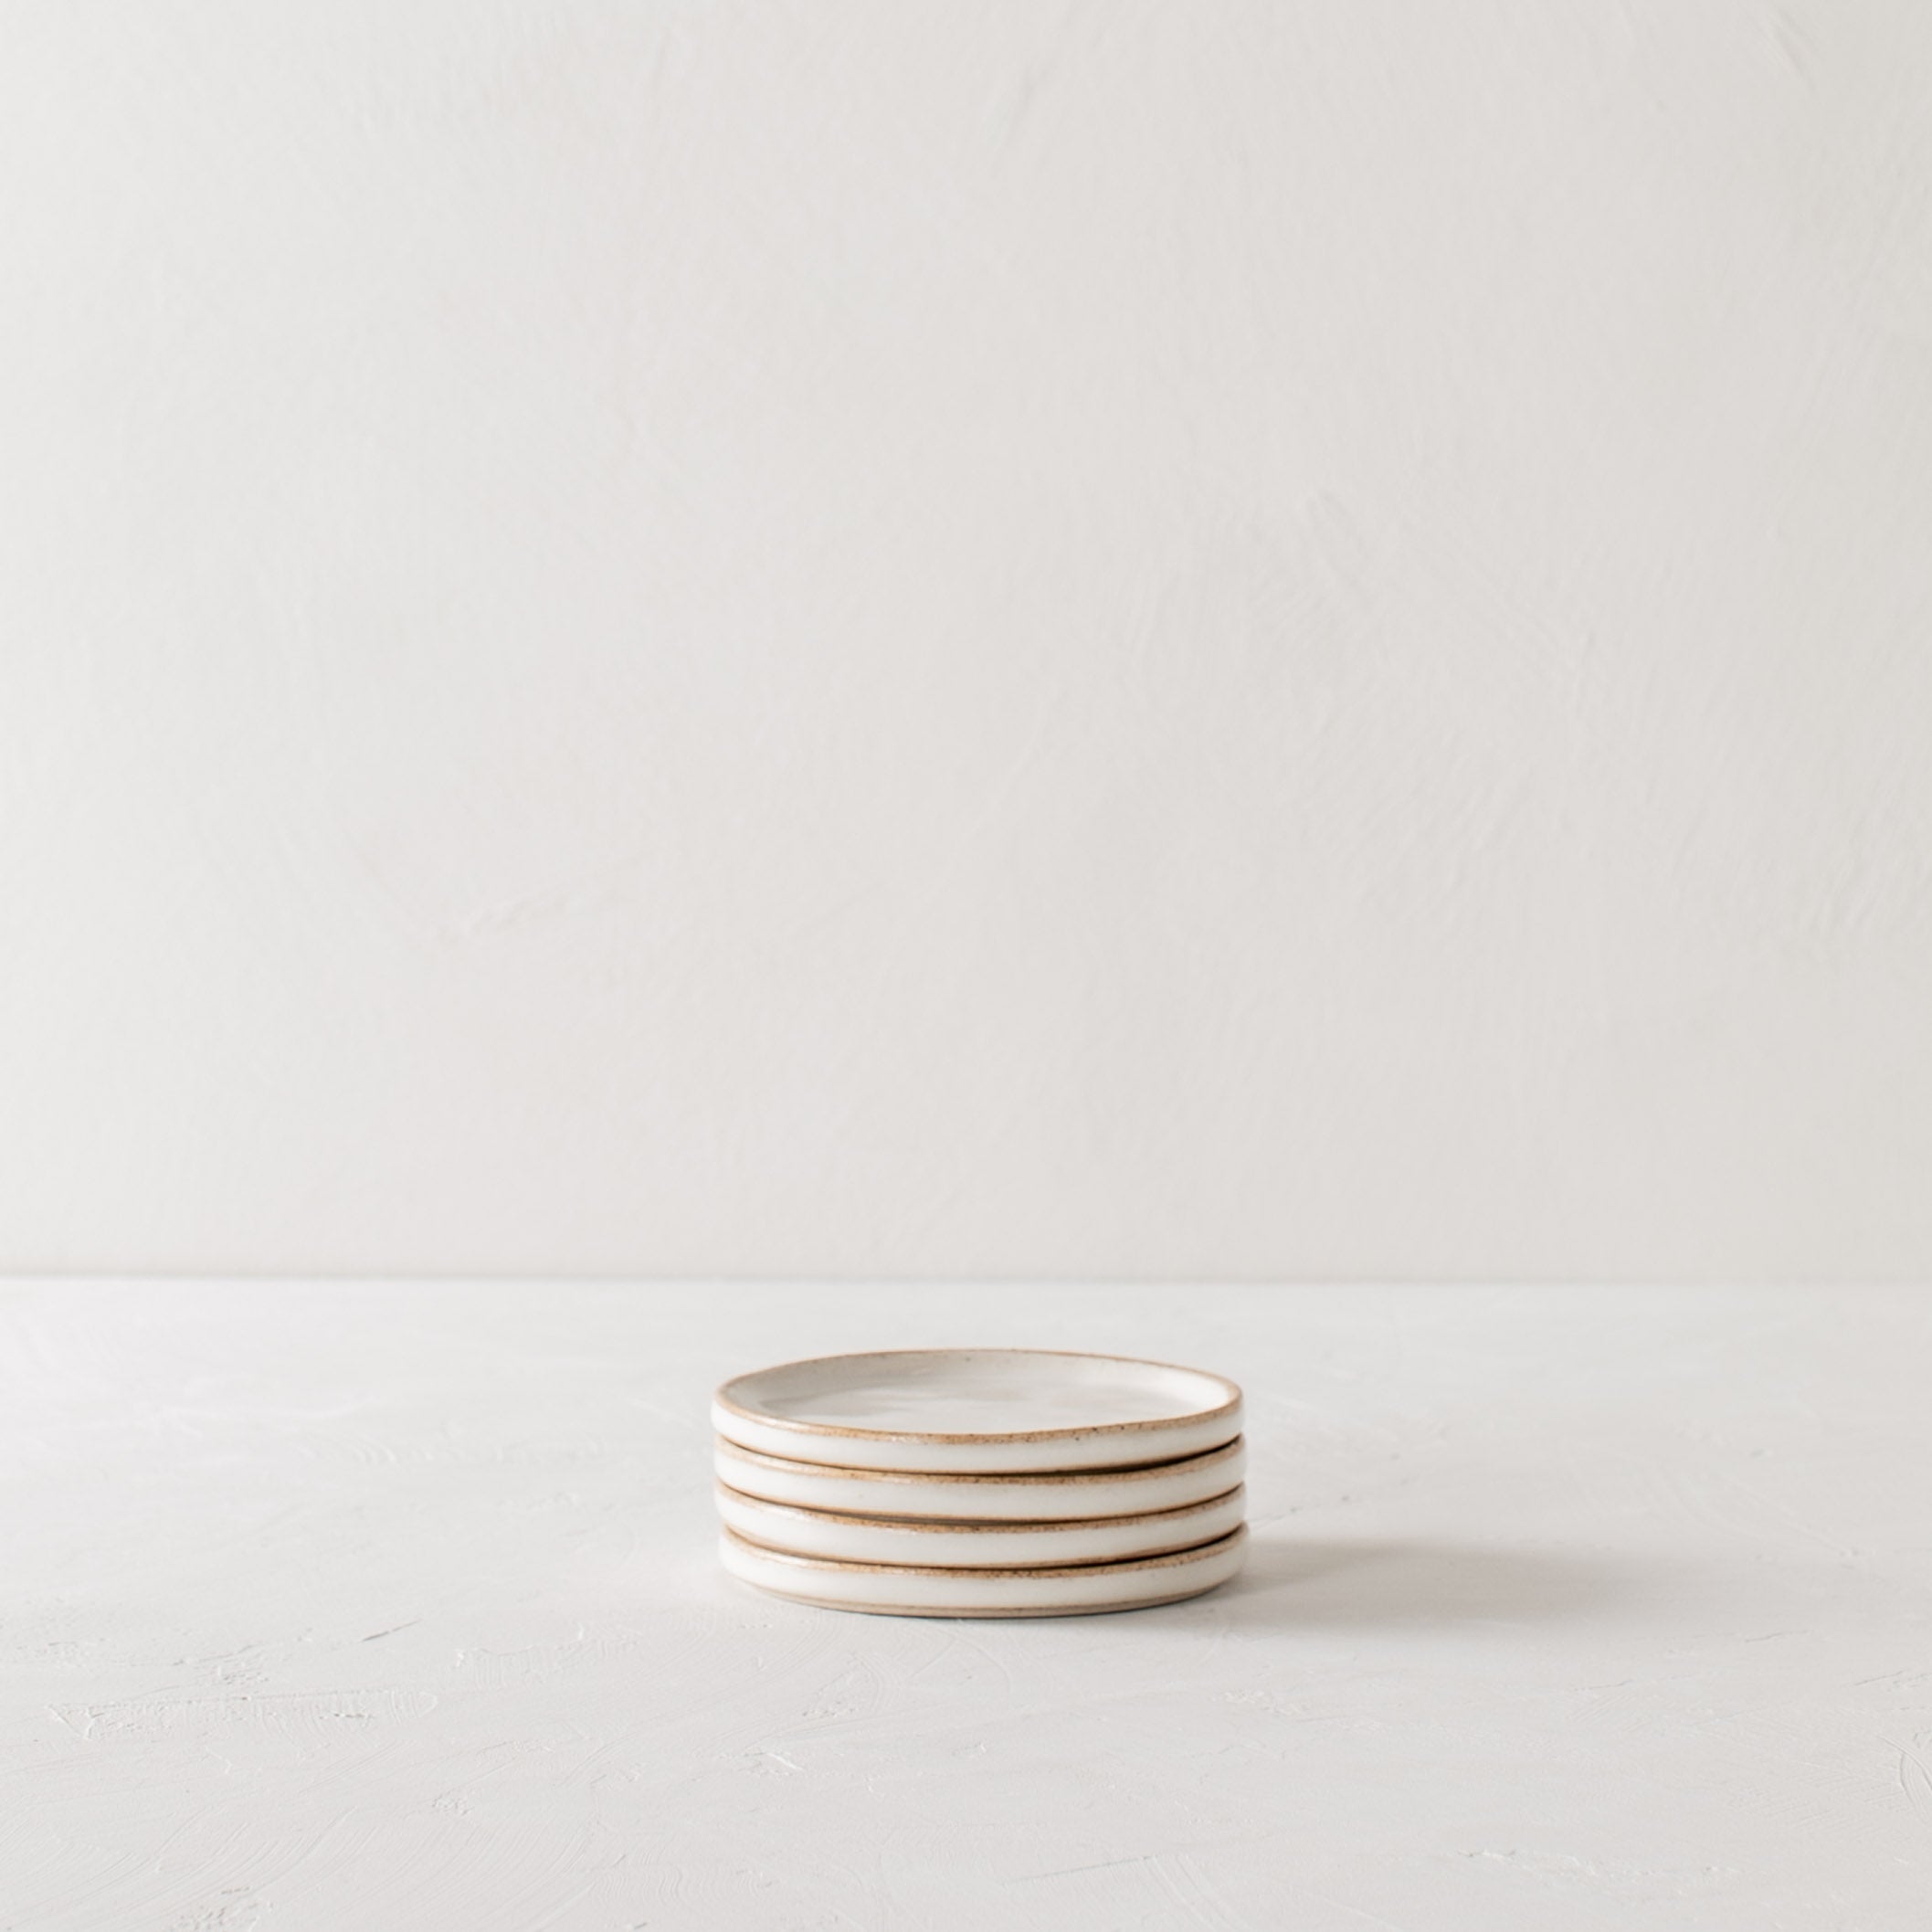 Stack of four white ceramic 4 inch side dishes. Dishes have exposed stoneware rims and bases. Handmade ceramic side dishes designed and sold by Convivial Production, Kansas City ceramics.